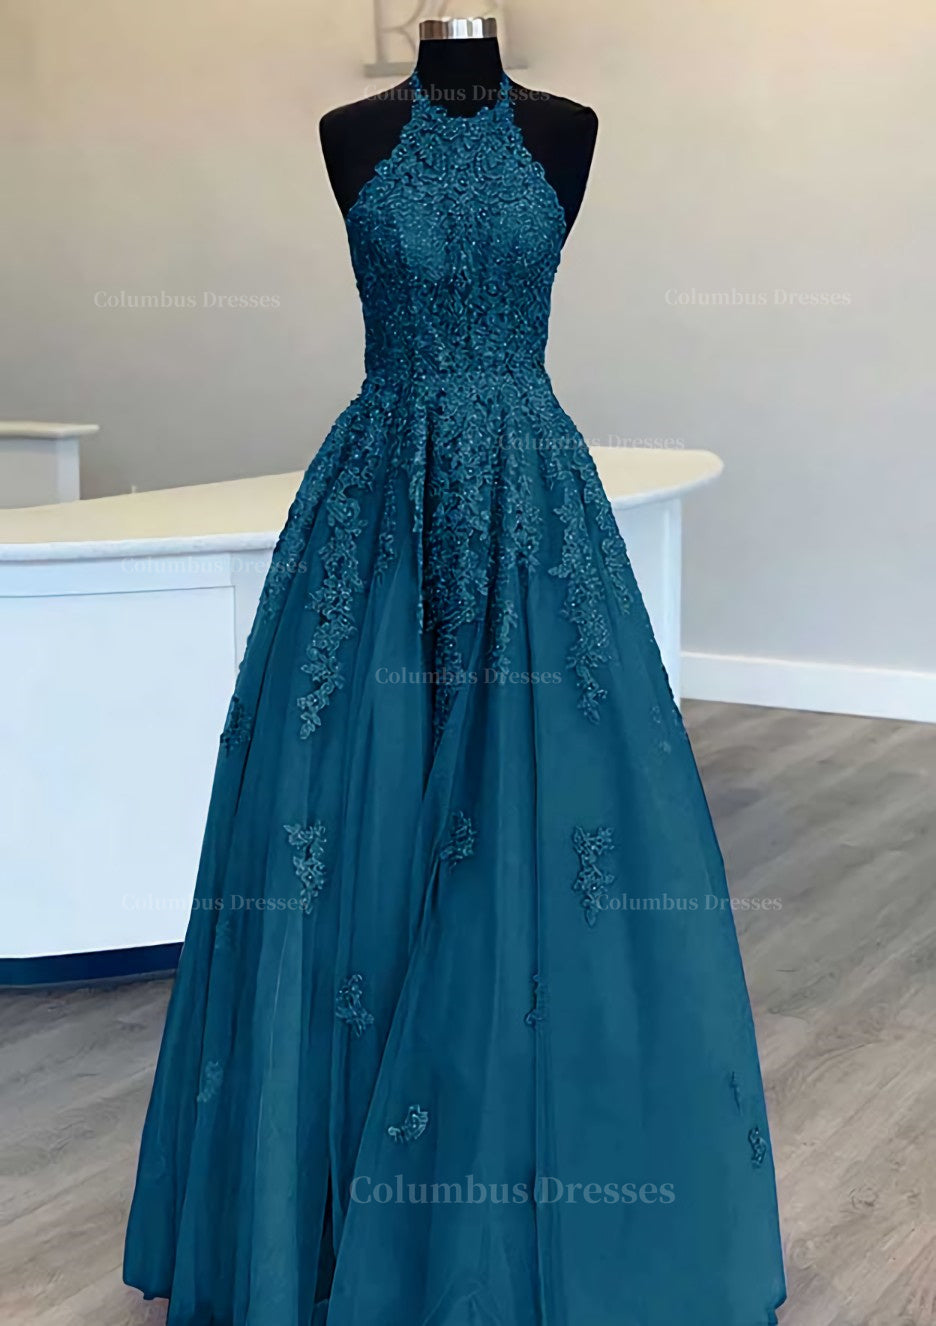 Party Dress Online Shopping, Princess Halter Long/Floor-Length Lace Tulle Prom Dress With Appliqued Beading